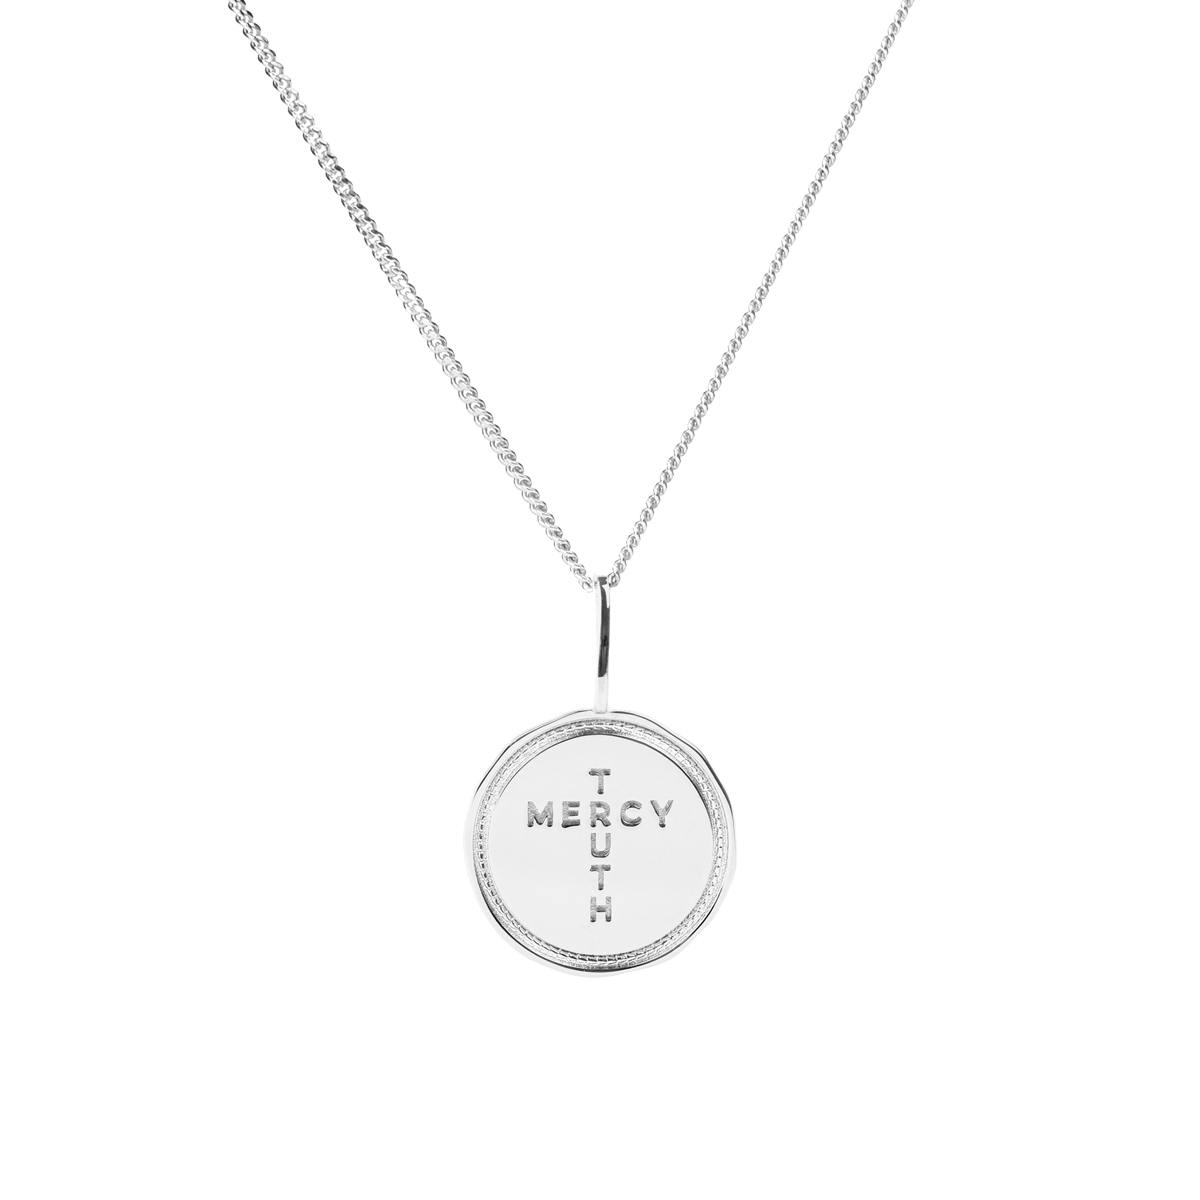 Emma Israelsson CROSS COIN NECKLACE SILVER